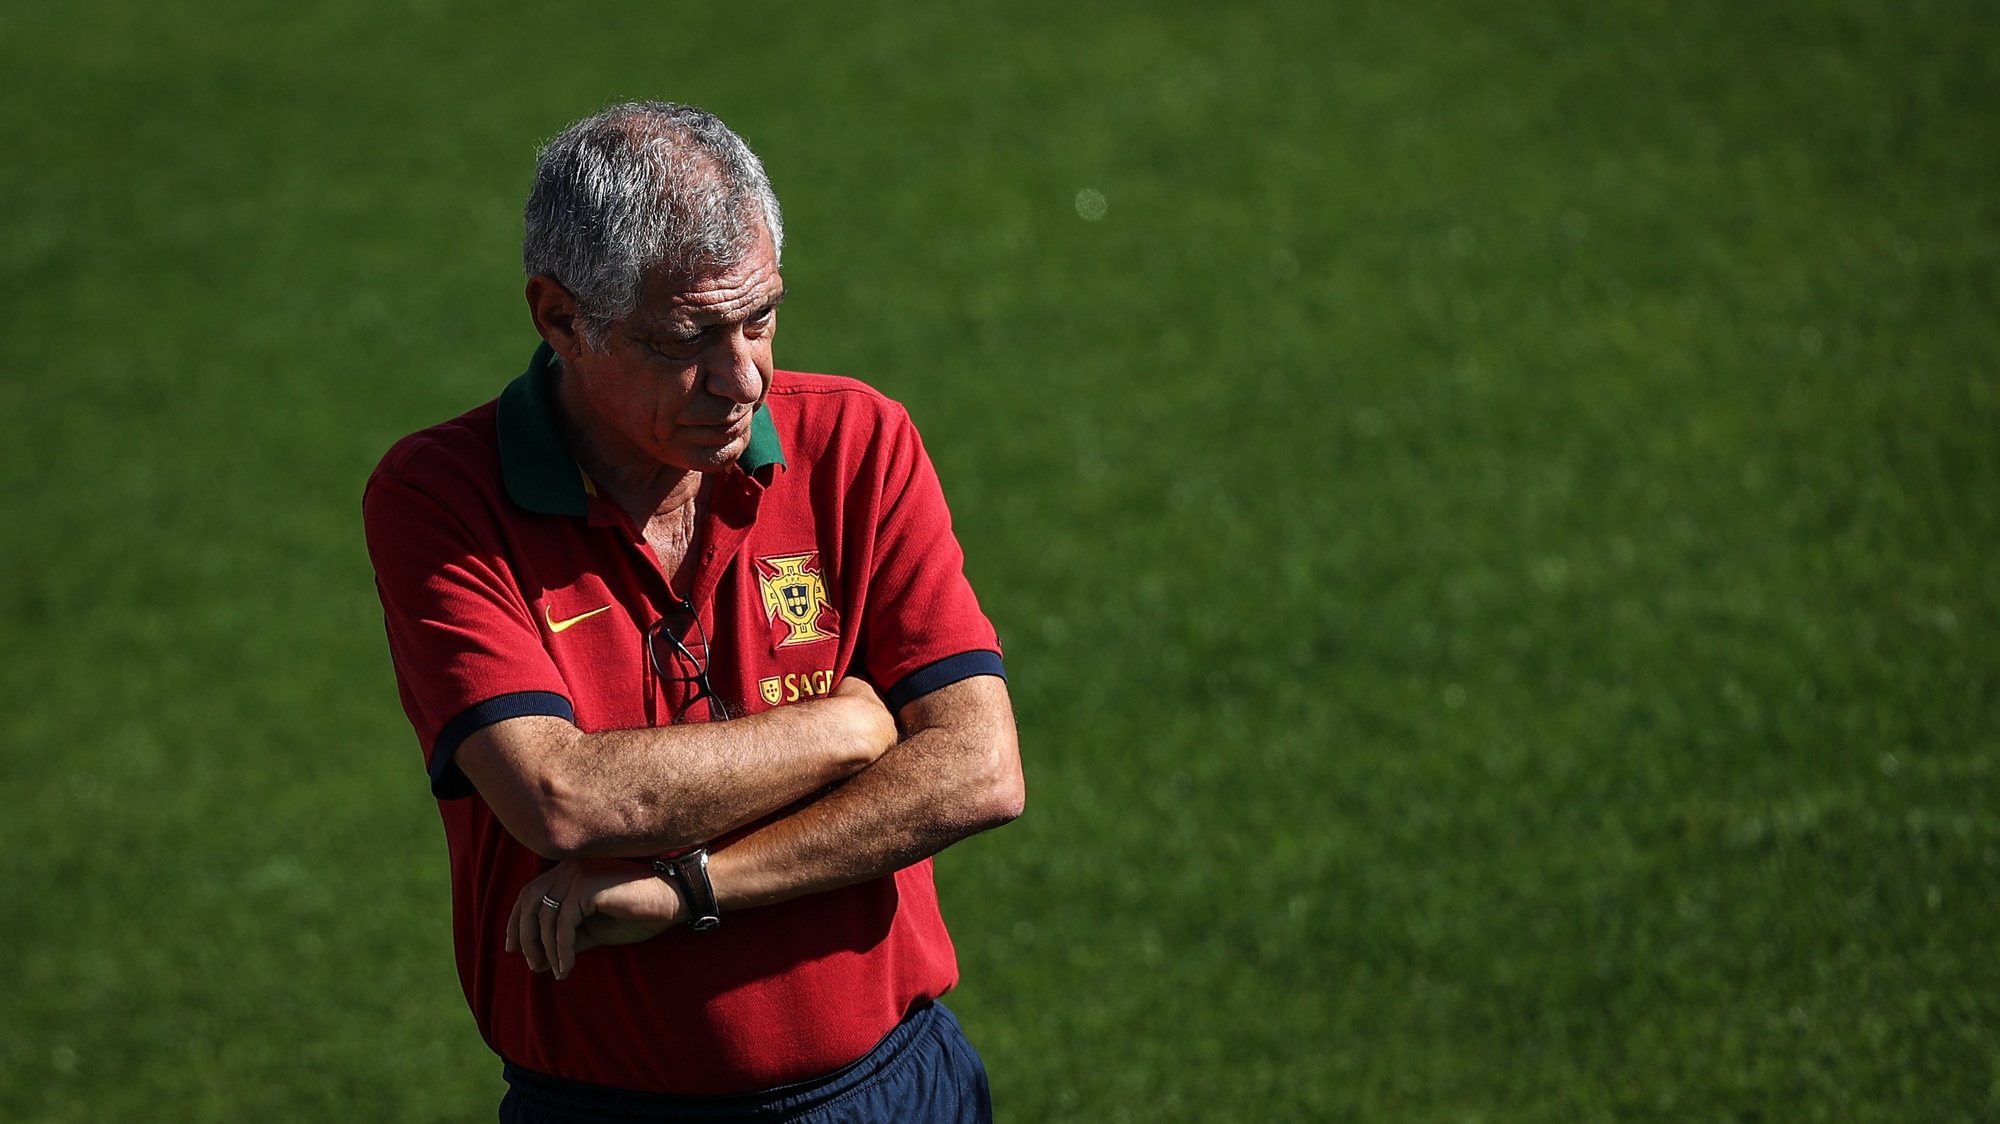 Portugal&#039;s head coach Fernando Santos during a training session at Cidade do Futebol in Oeiras, outskirts of Lisbon, Portugal, 21 September 2022. Portugal will play against the Czechia Republic on 24th of September in Prague and Spain on the 27th September in Portugal northern city of Braga for the upcoming UEFA Nations League. RODRIGO ANTUNES/LUSA